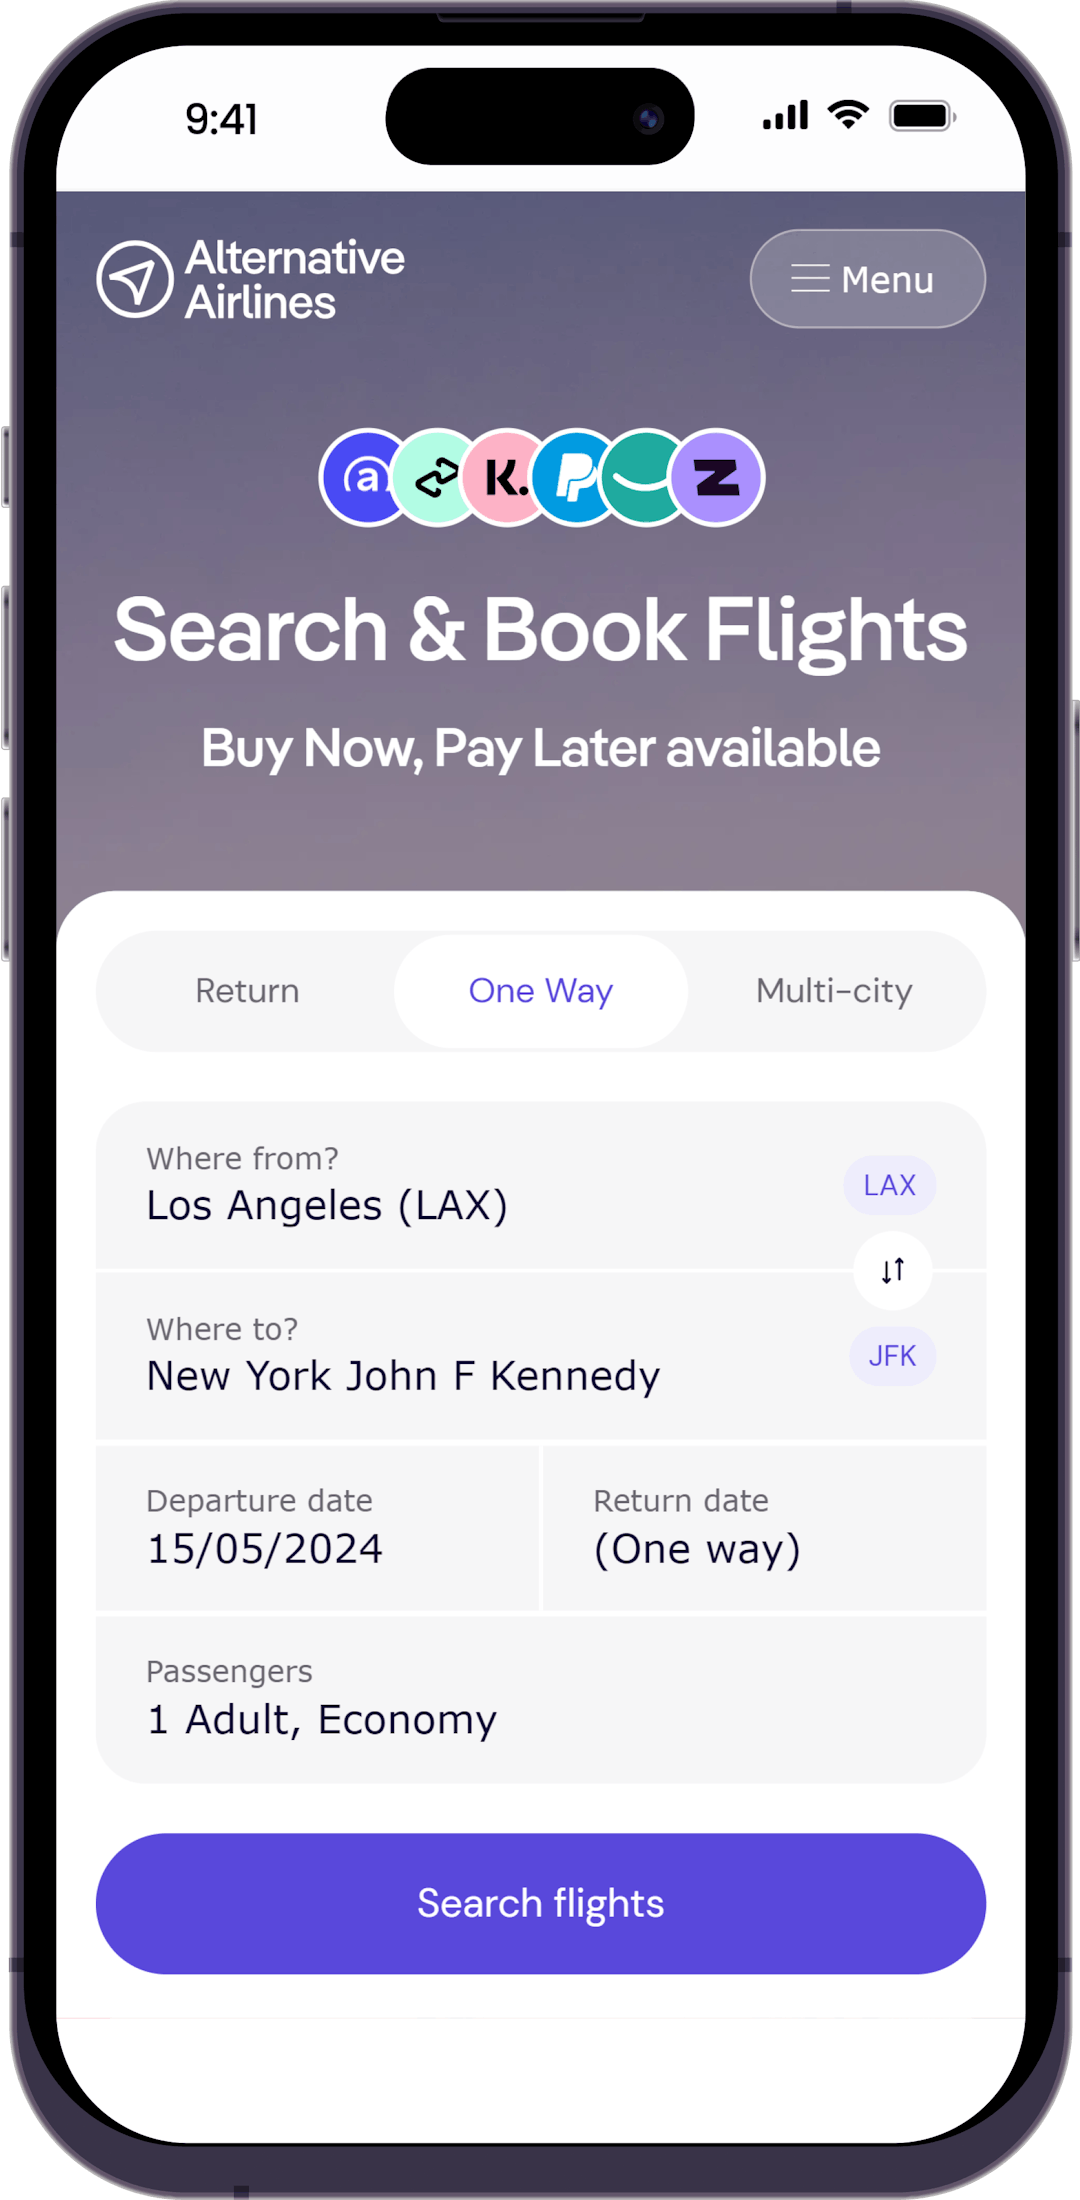 Step 1 - Search for flights using search form